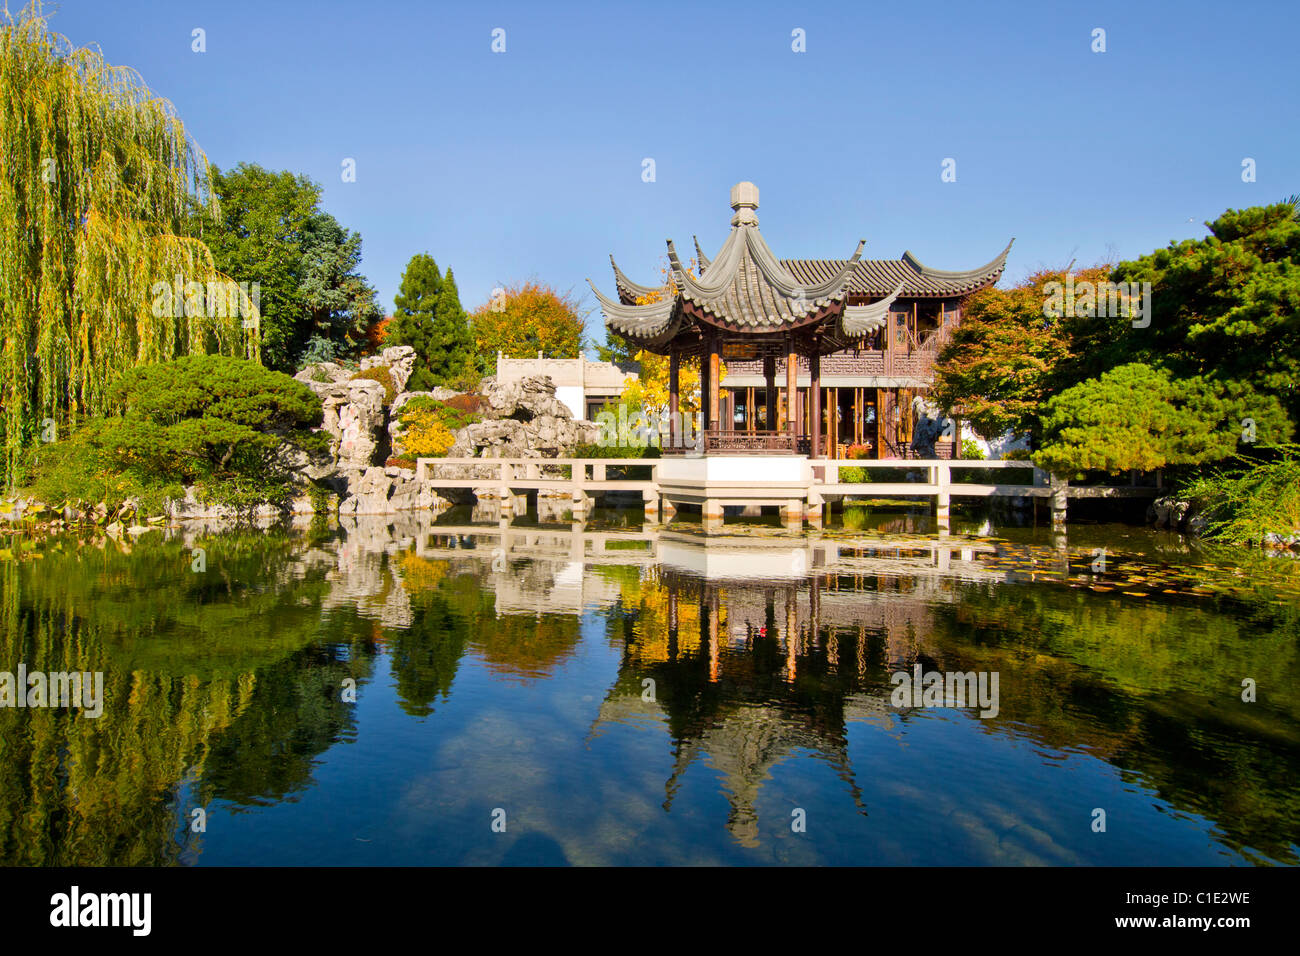 Reflection by the Pond in Suzhou Classical Style Chinese Garden Stock Photo